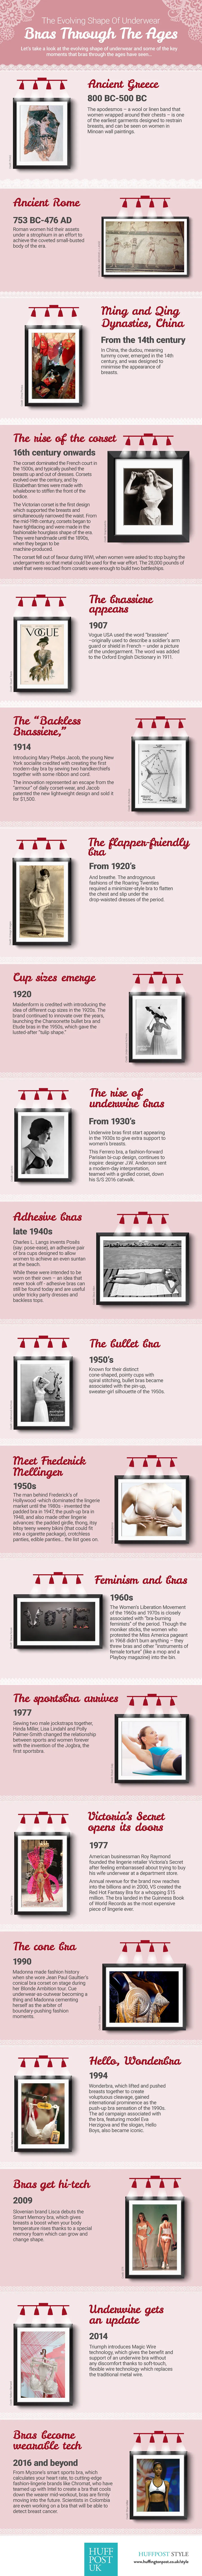 The history of the bra —Infographic :: Behance